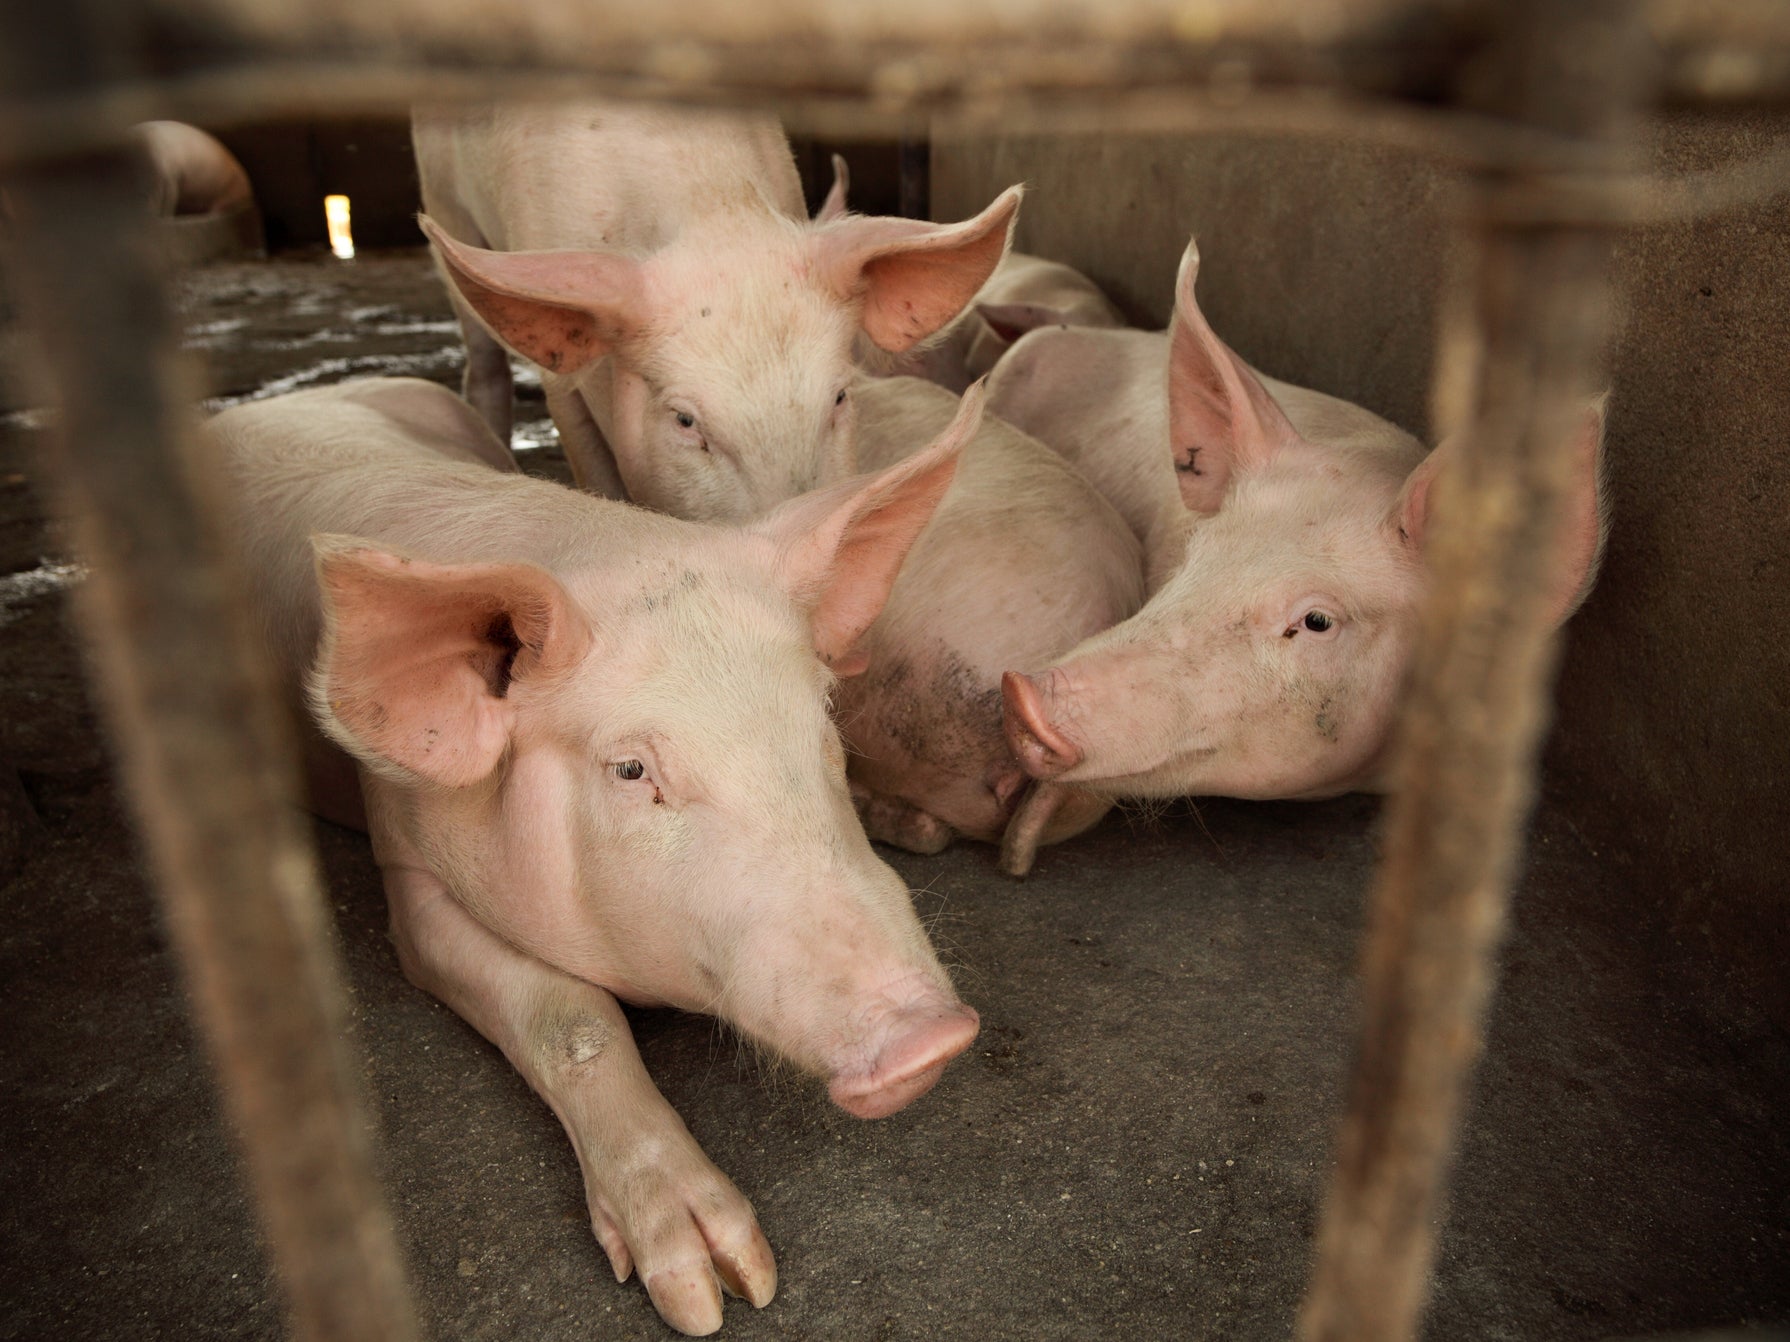 'Nearly one million pigs killed' as African swine fever worsens in Nigeria